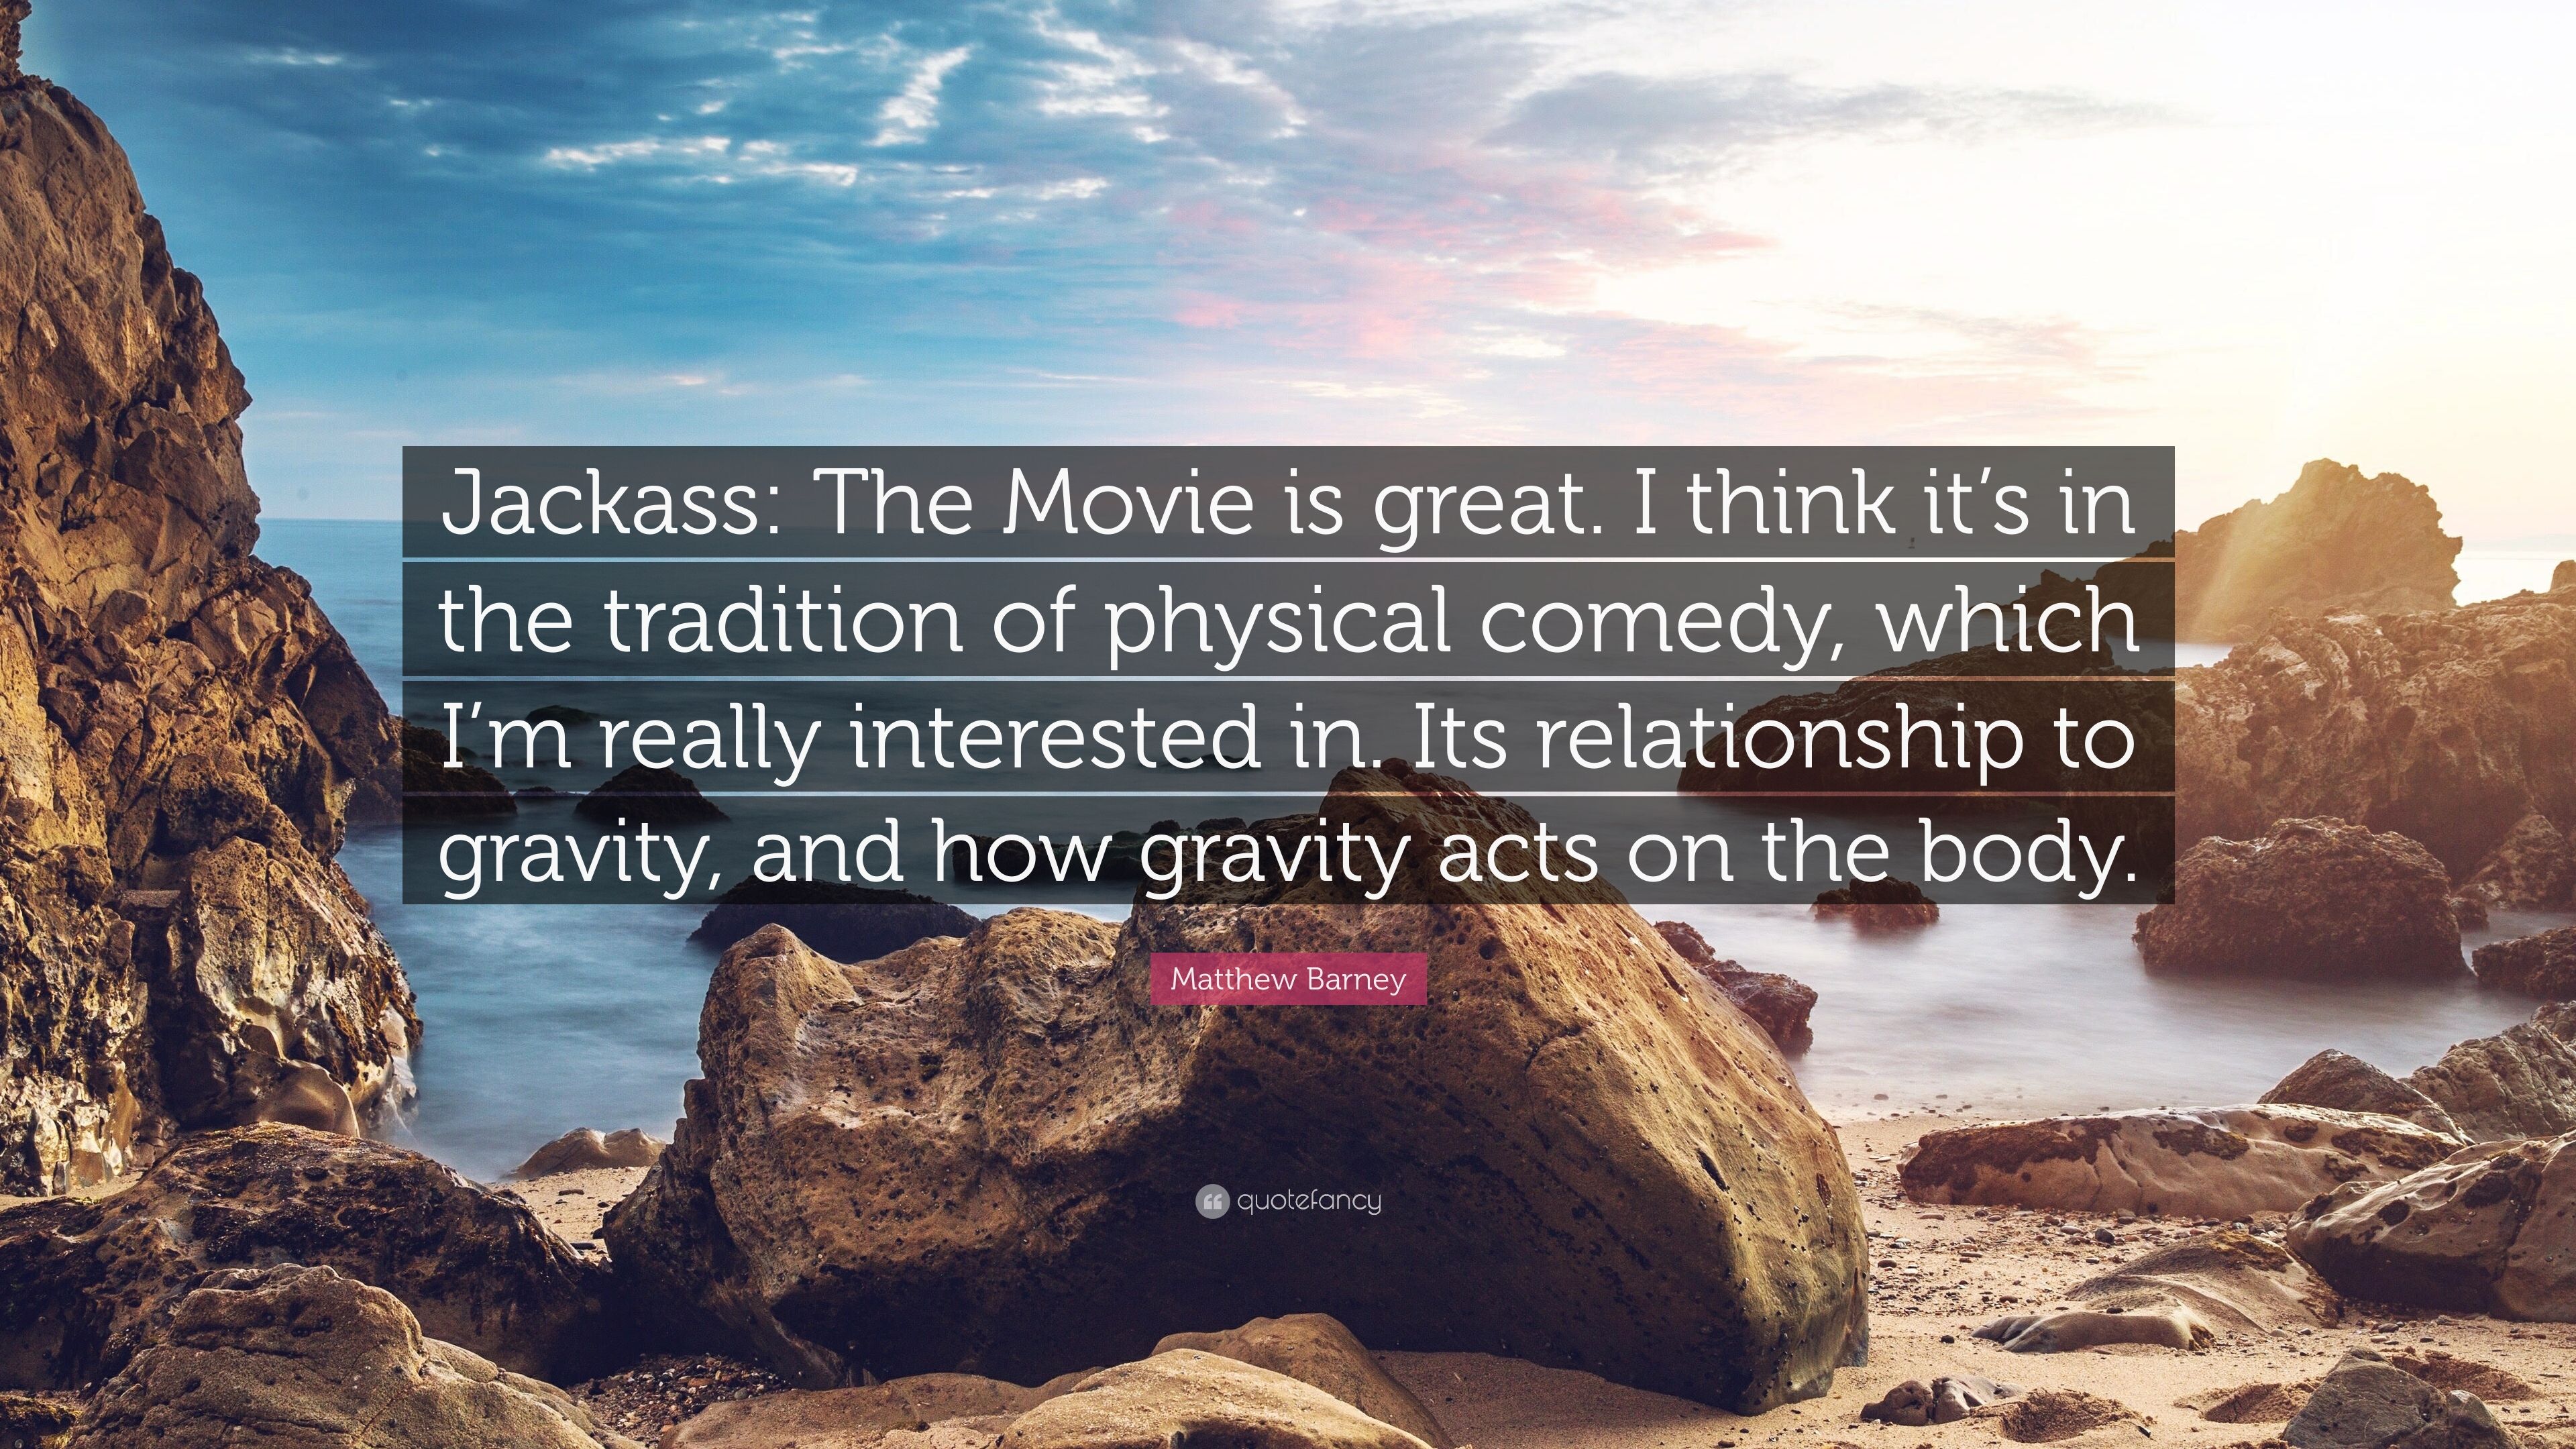 Matthew Barney Quote: “Jackass: The Movie is great. I think it's